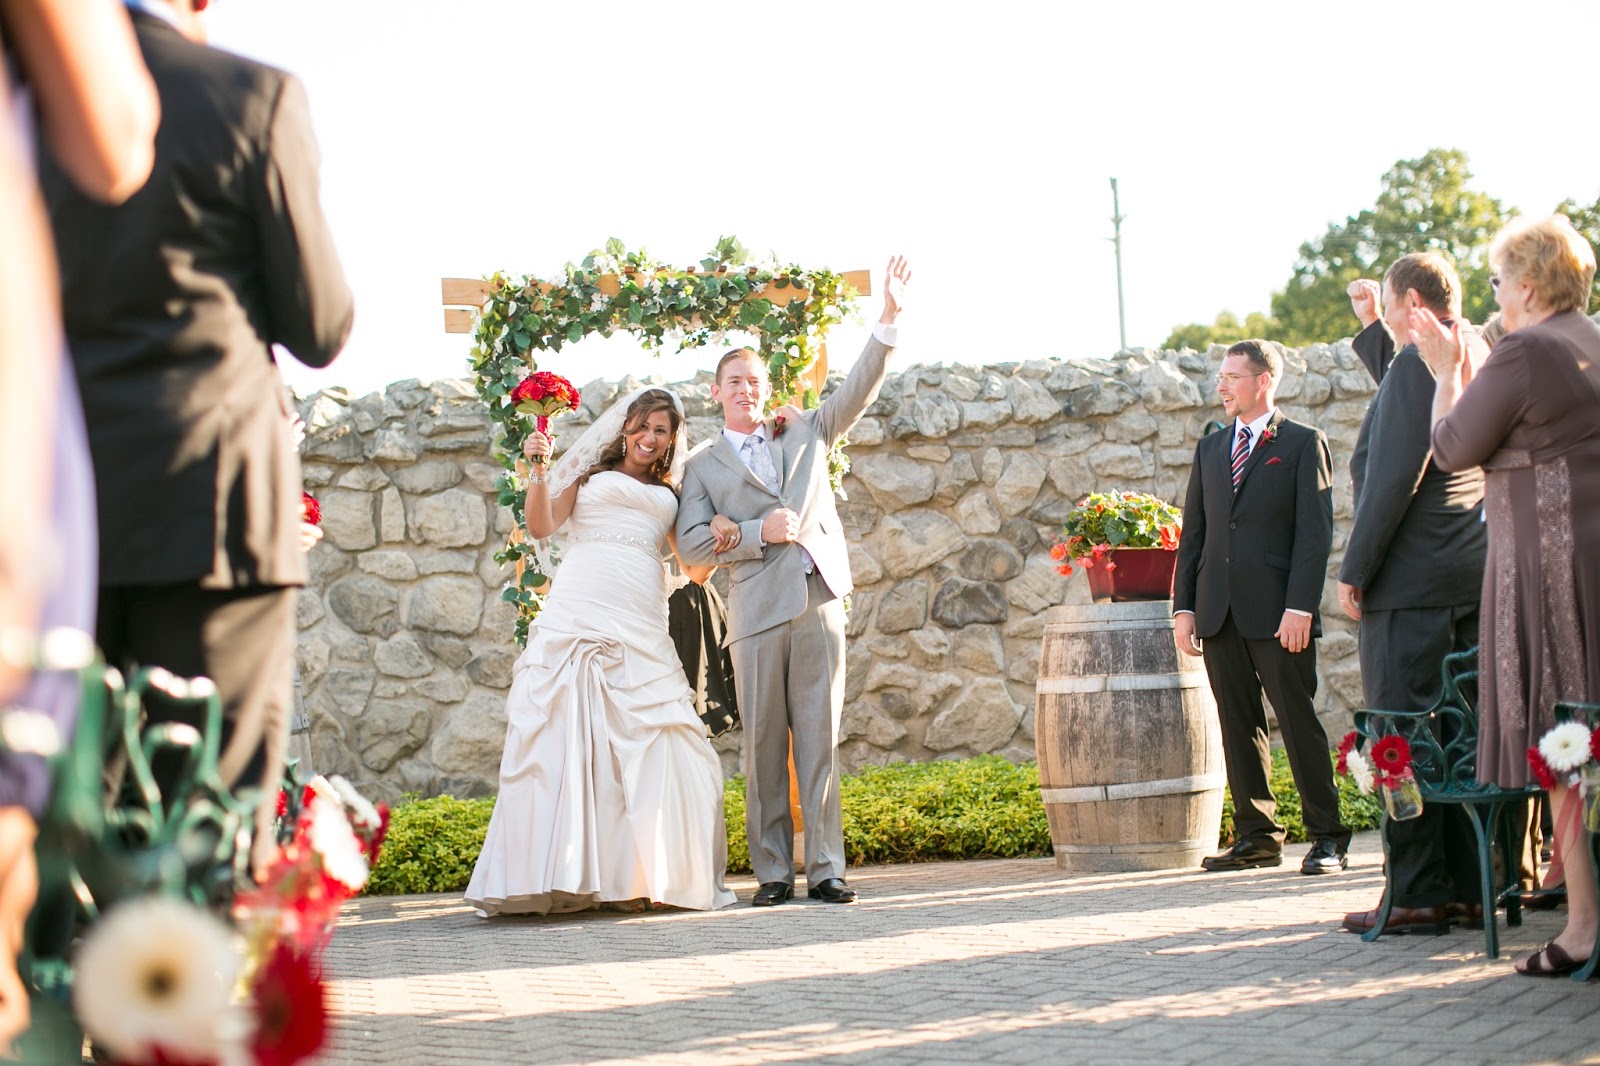 Hernder Estates Winery in Niagara outdoor wedding // thelifestyle-project.com